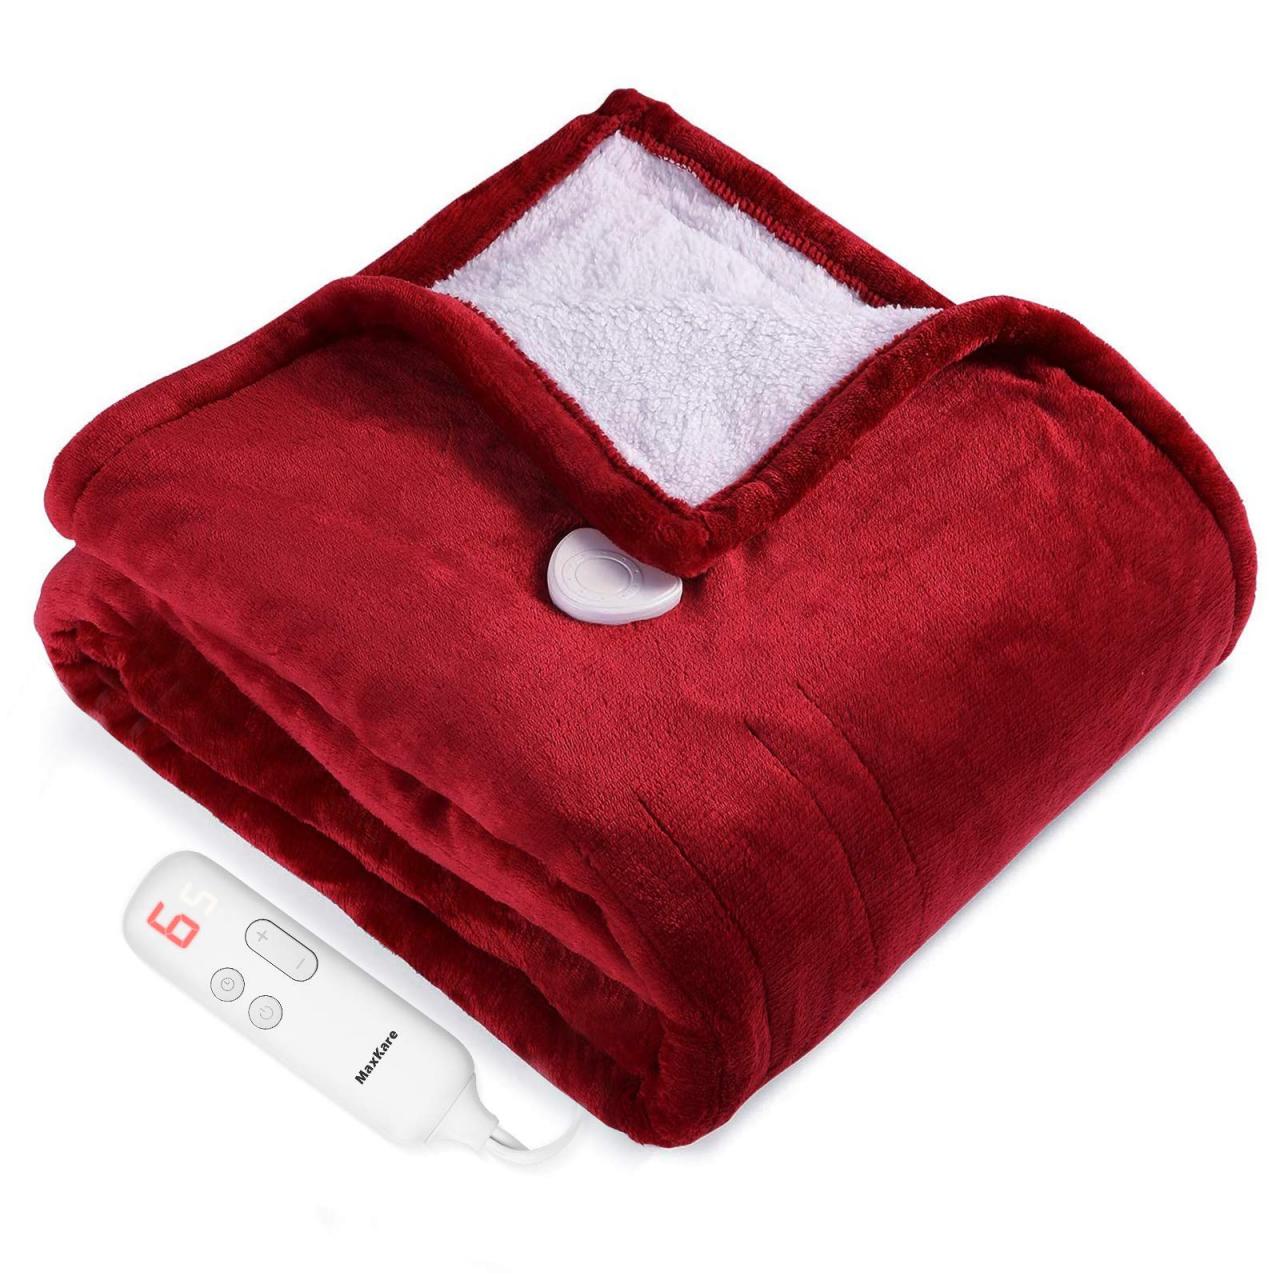 MaxKare Throw Flannel Fast Heating Electric Blanket with 6 Levels, Auto Off  and Safety Technology Body Warm for Home, Office, Bed, Sofa and  Machine-Washable 130x180cm Red- Buy Online in Azerbaijan at  azerbaijan.desertcart.com.